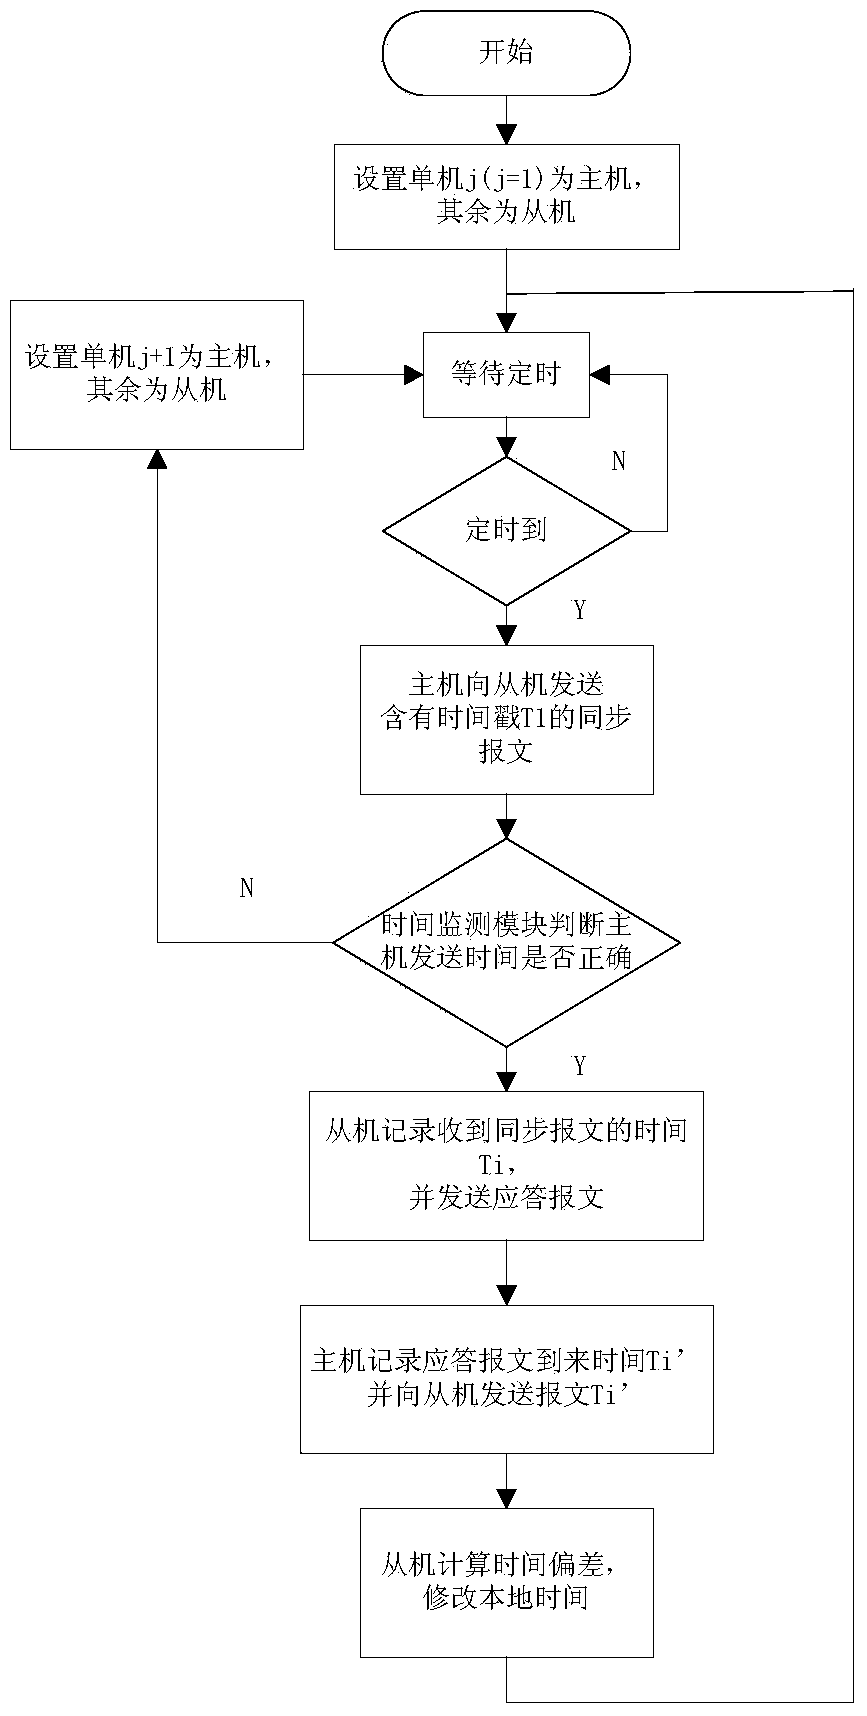 Hot backup redundancy computer time synchronization system and method thereof